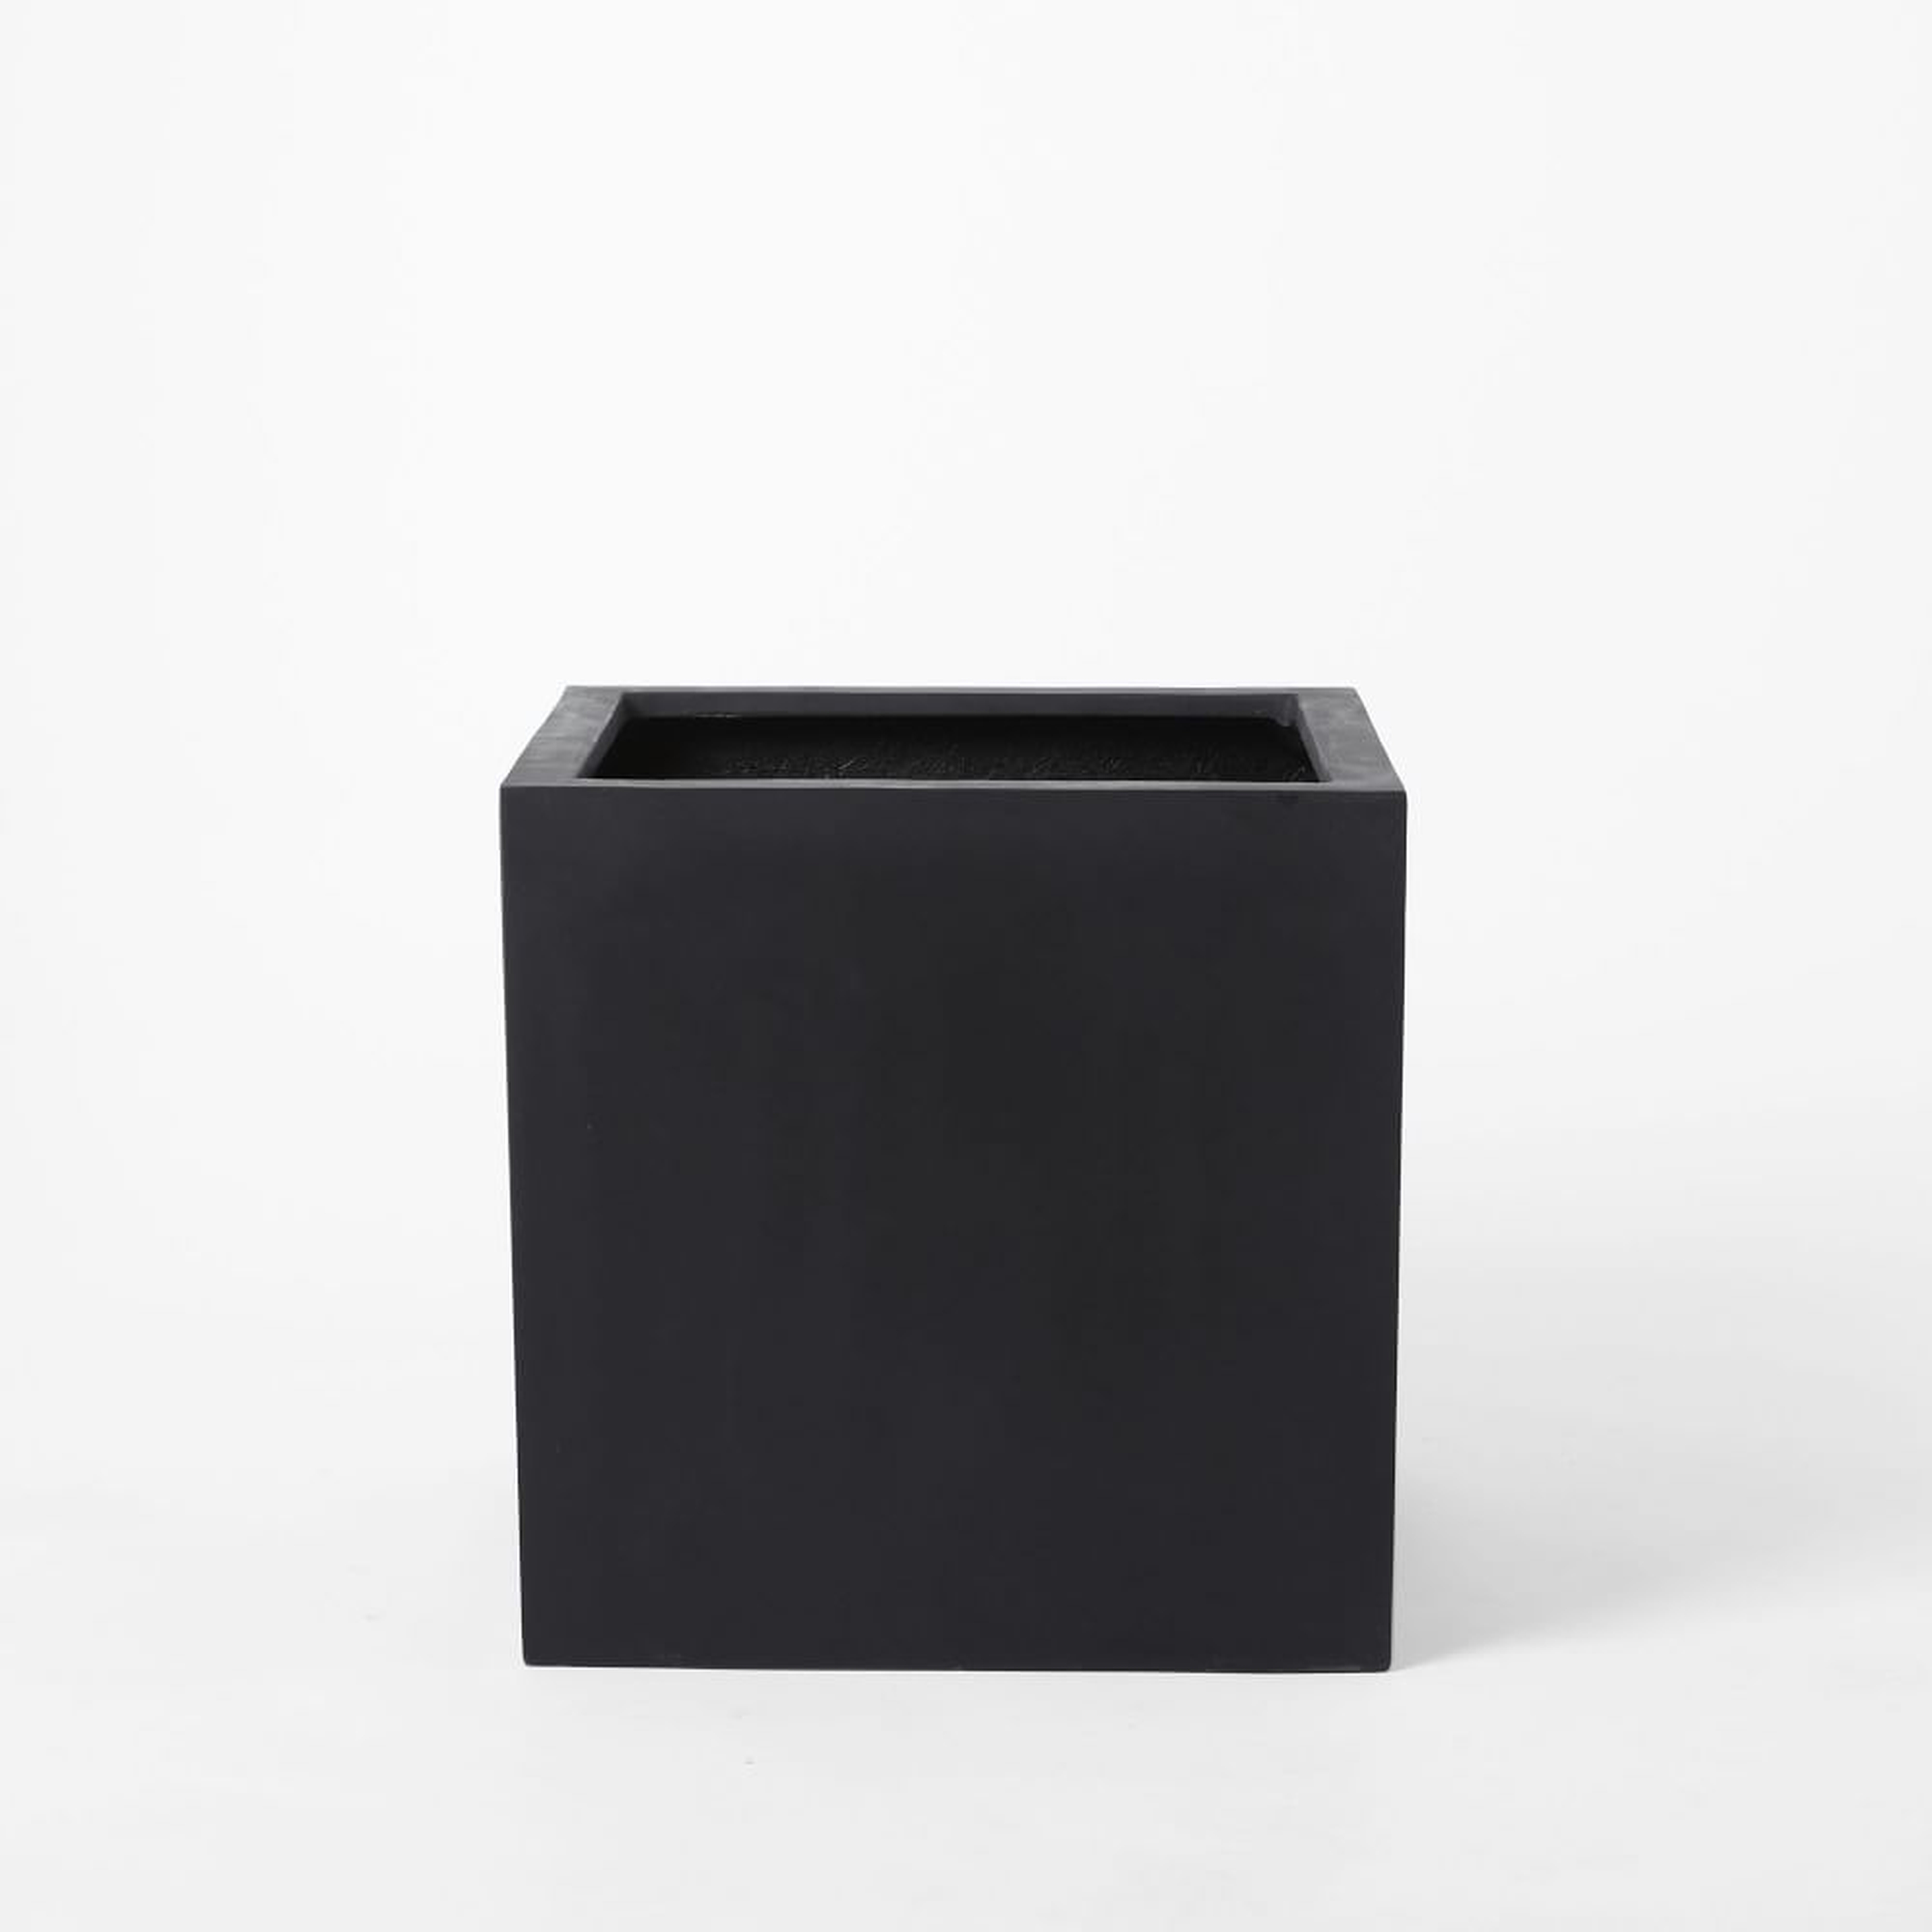 Cityscape Ficonstone Indoor/Outdoor Planter, Small Square, 15.7"SQ x 15.7"H, Black - West Elm